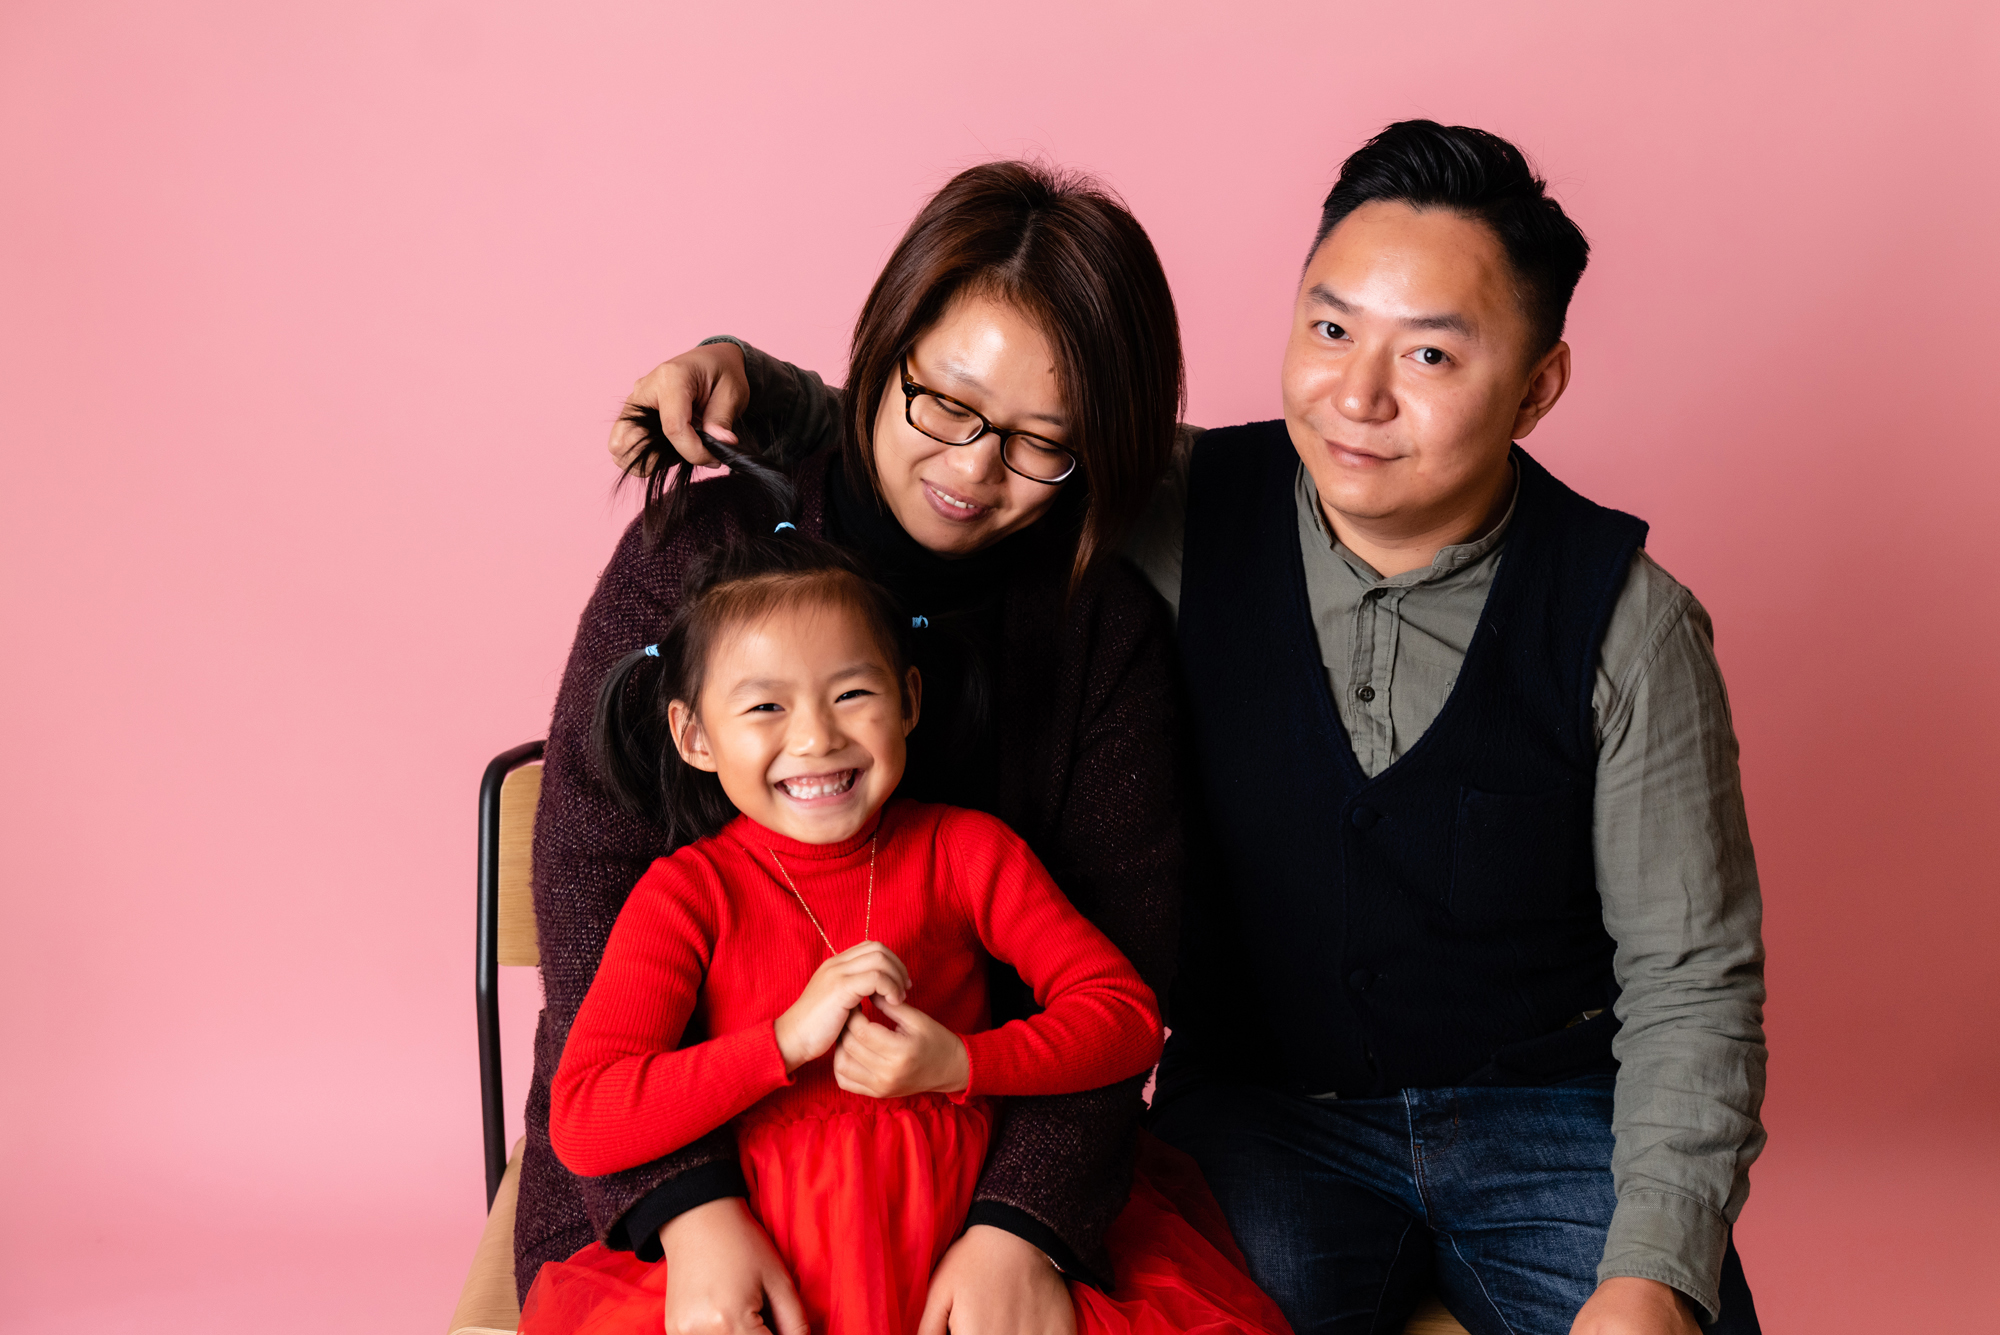 Sweet family portraits | Capturing cute moments